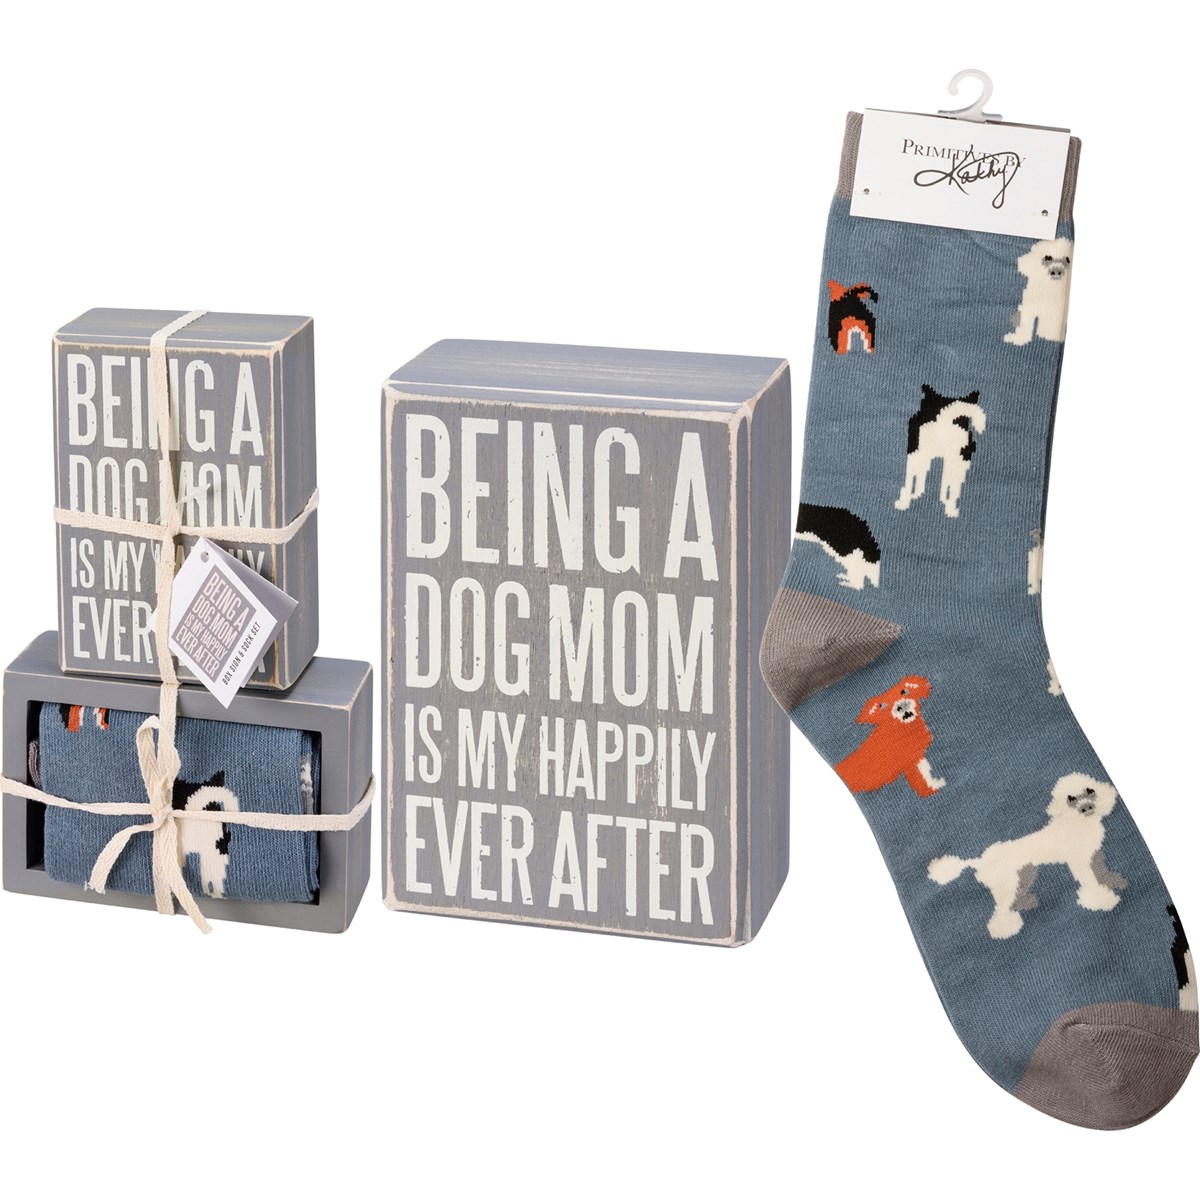 Dog Mom Happily Ever After Box Sign And Sock Set - Wood, Cotton, Nylon, Spandex, Ribbon